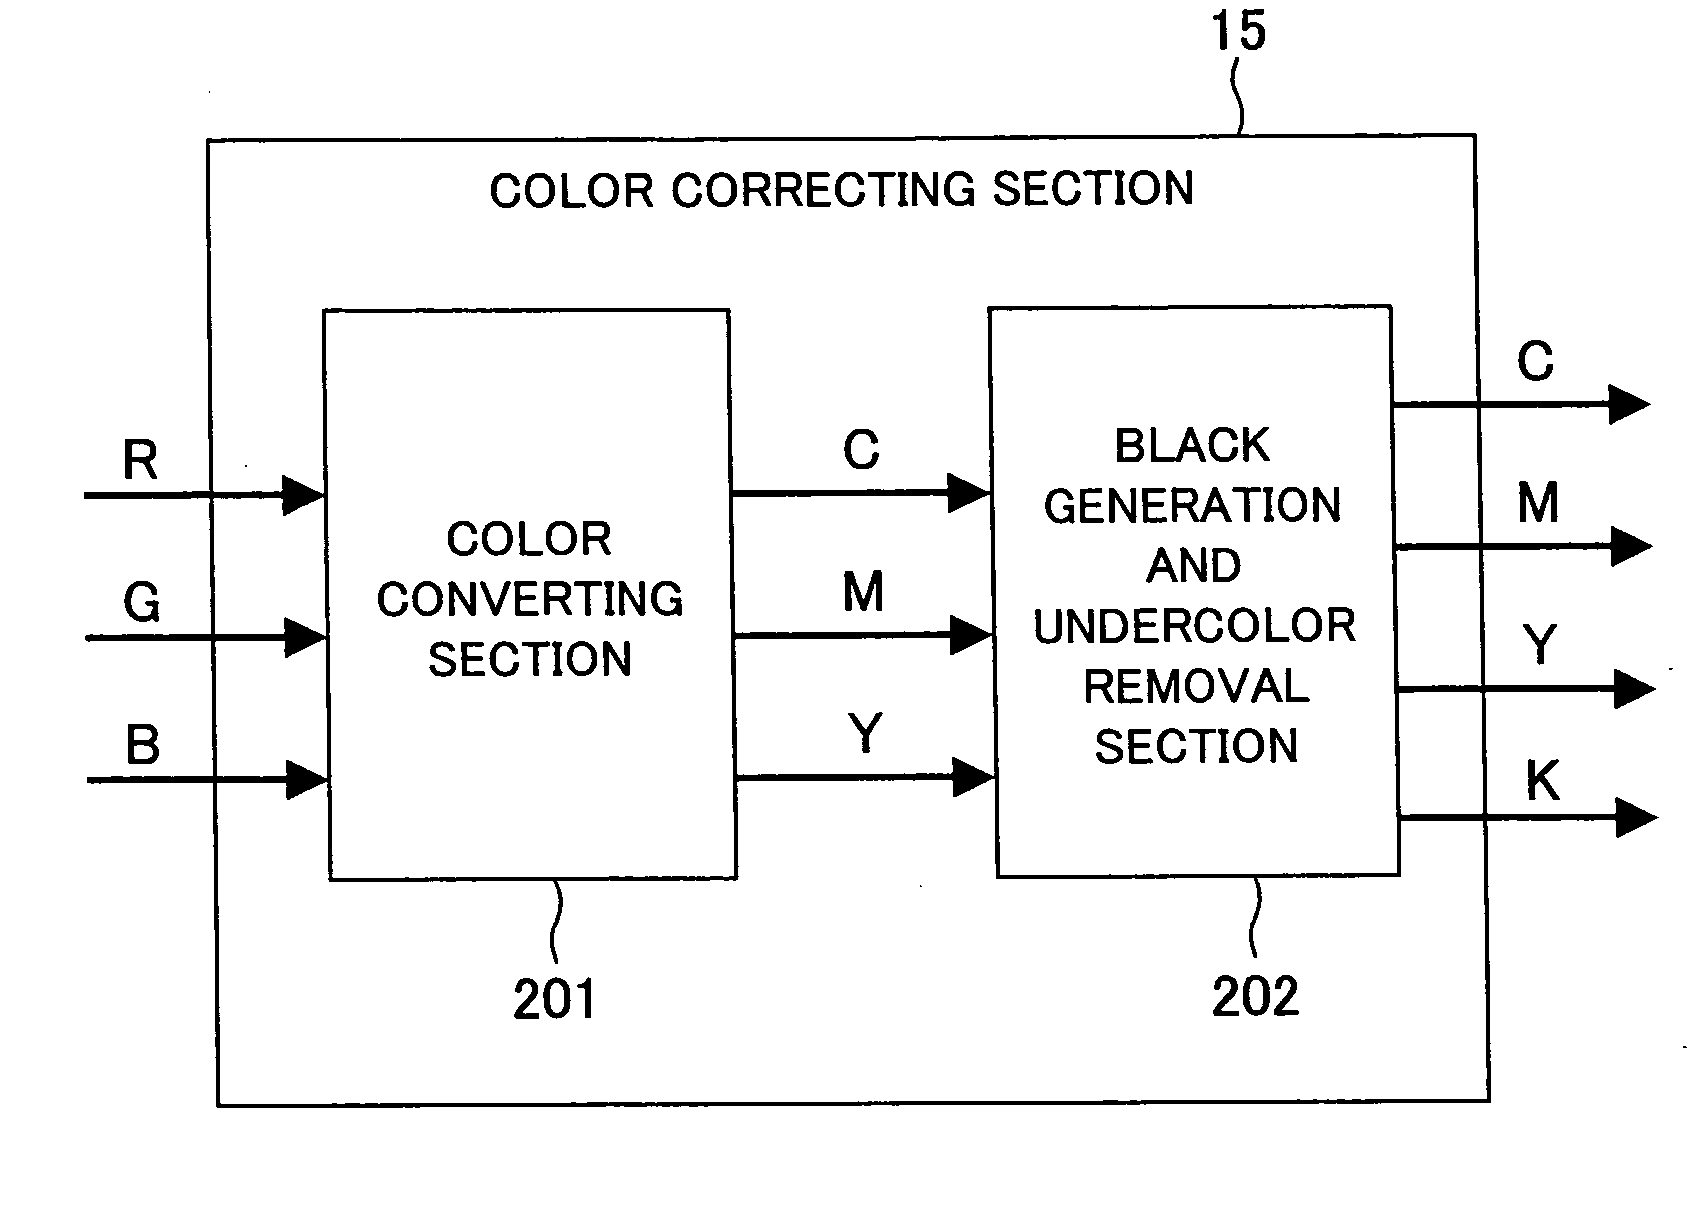 Image processing apparatus, image forming apparatus, control method of image processing apparatus, image processing program, and a computer-readable storage medium